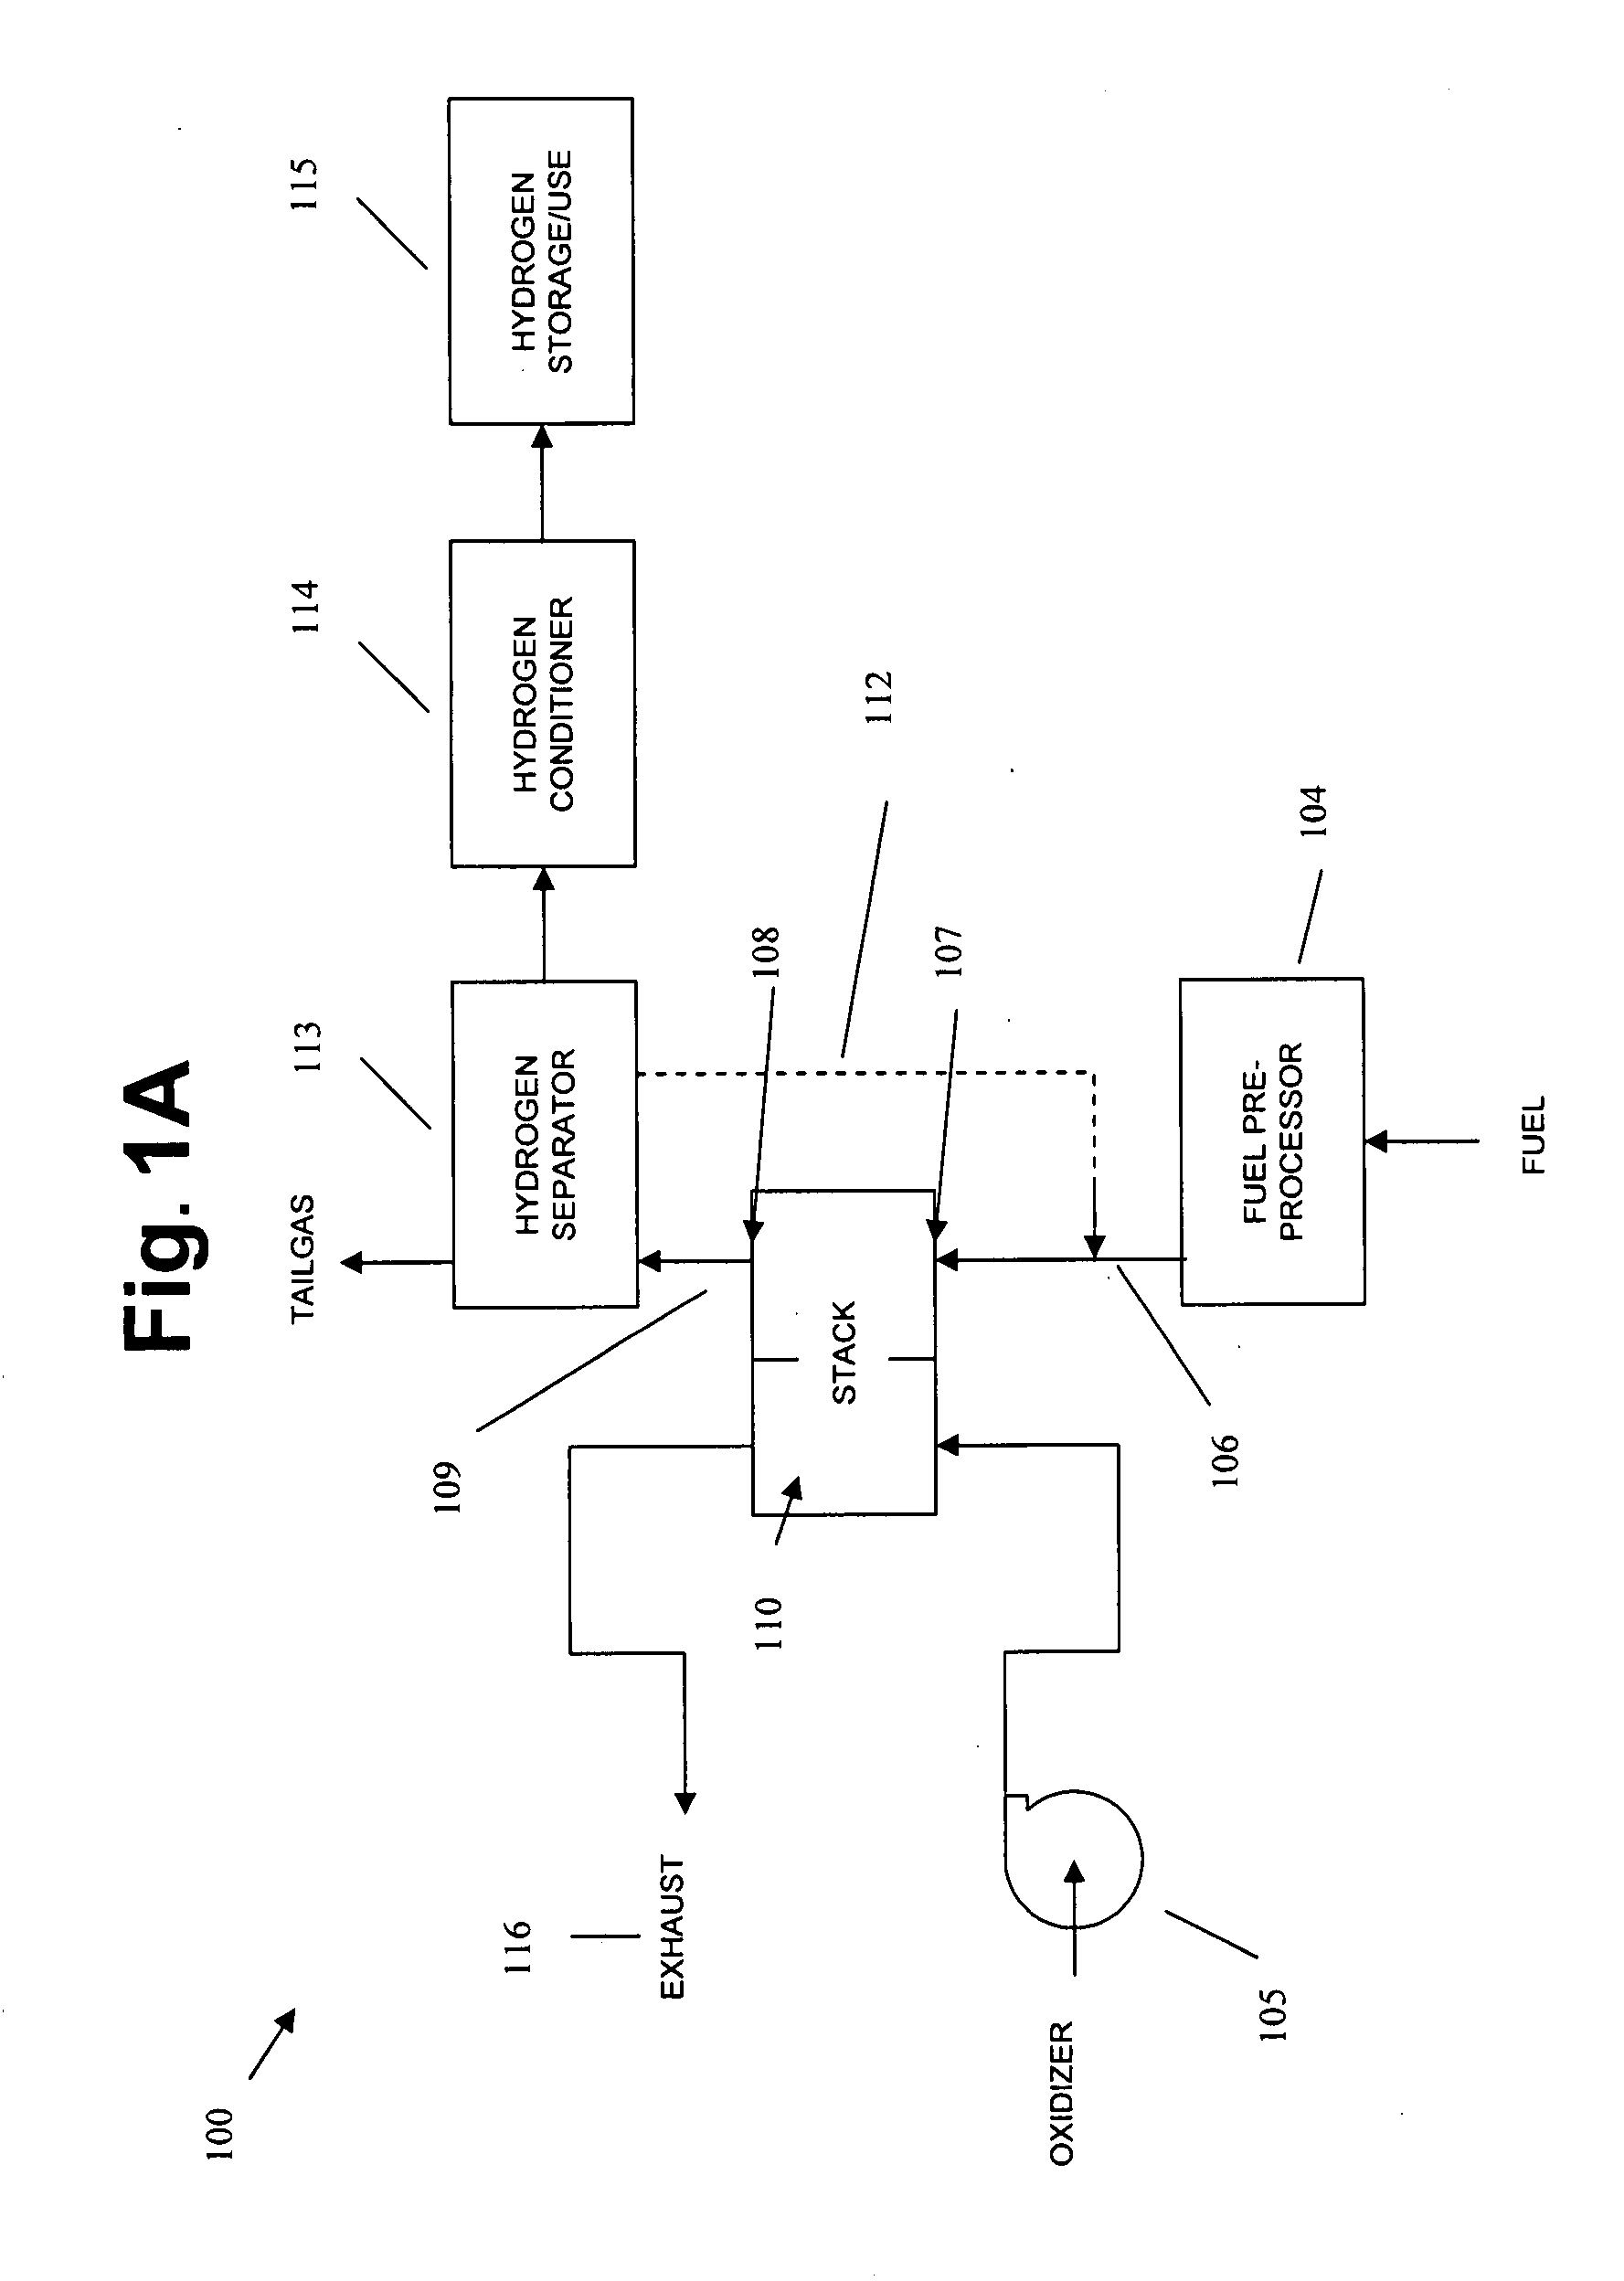 Low pressure hydrogen fueled vehicle and method of operating same